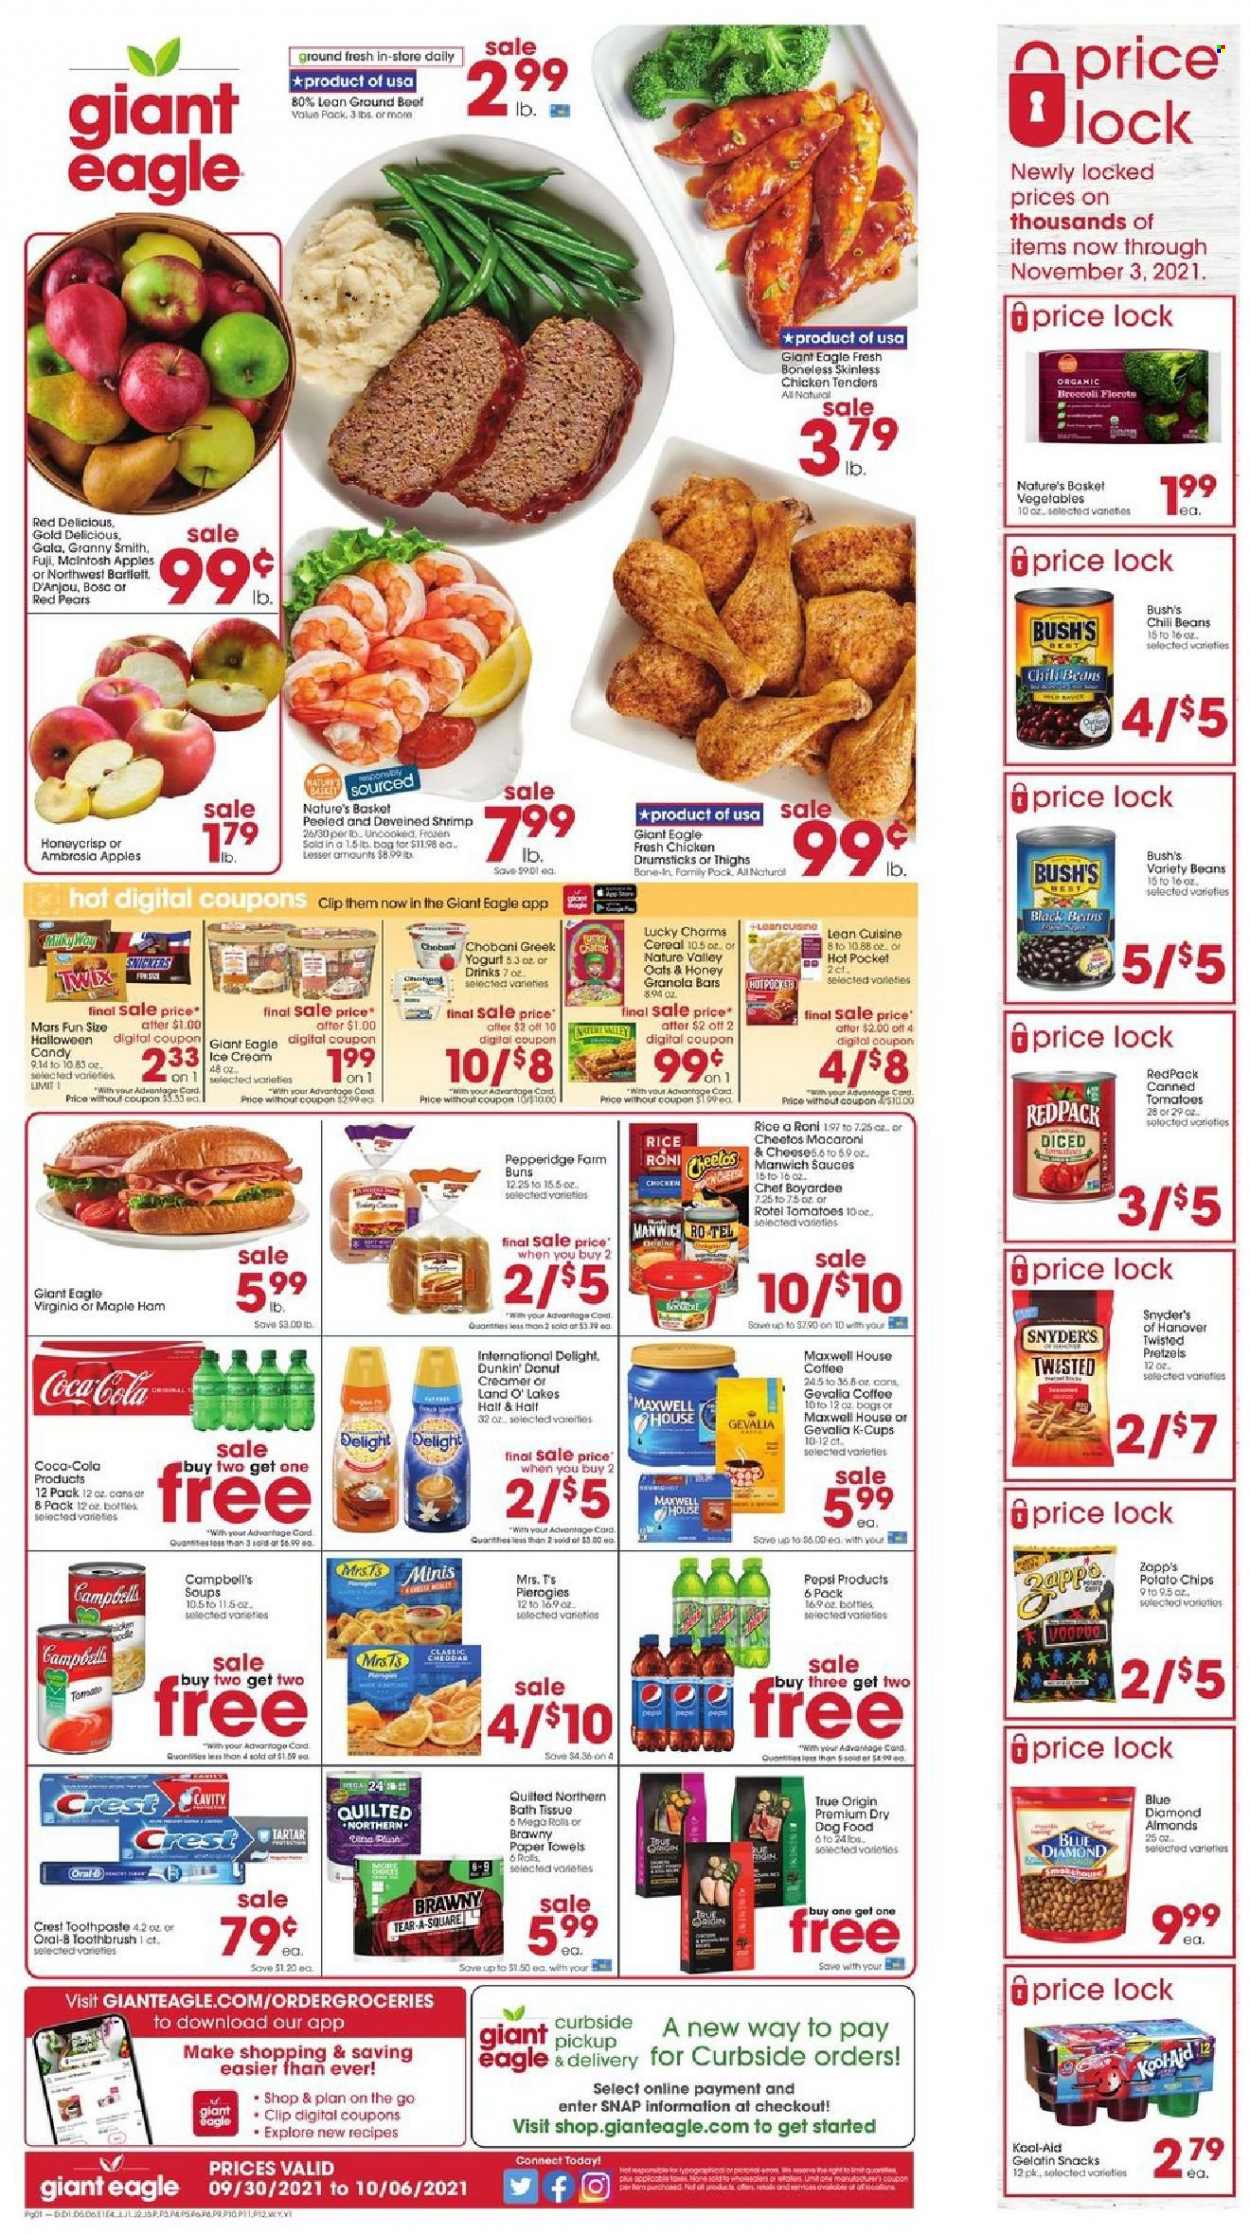 thumbnail - Giant Eagle Flyer - 09/30/2021 - 10/06/2021 - Sales products - pretzels, buns, donut, tomatoes, apples, Red Delicious apples, pears, Granny Smith, cod, shrimps, Campbell's, hot pocket, chicken tenders, macaroni, Lean Cuisine, ham, cheese, greek yoghurt, yoghurt, Chobani, creamer, ice cream, snack, Twix, Mars, Cheetos, black beans, chili beans, Manwich, Chef Boyardee, cereals, granola bar, Nature Valley, rice, almonds, Blue Diamond, Coca-Cola, Pepsi, Maxwell House, coffee, coffee capsules, K-Cups, Gevalia, chicken drumsticks, beef meat, ground beef, bath tissue, Quilted Northern, kitchen towels, paper towels, toothbrush, Oral-B, toothpaste, Crest, basket, animal food, dog food, dry dog food, gelatin, Half and half. Page 1.